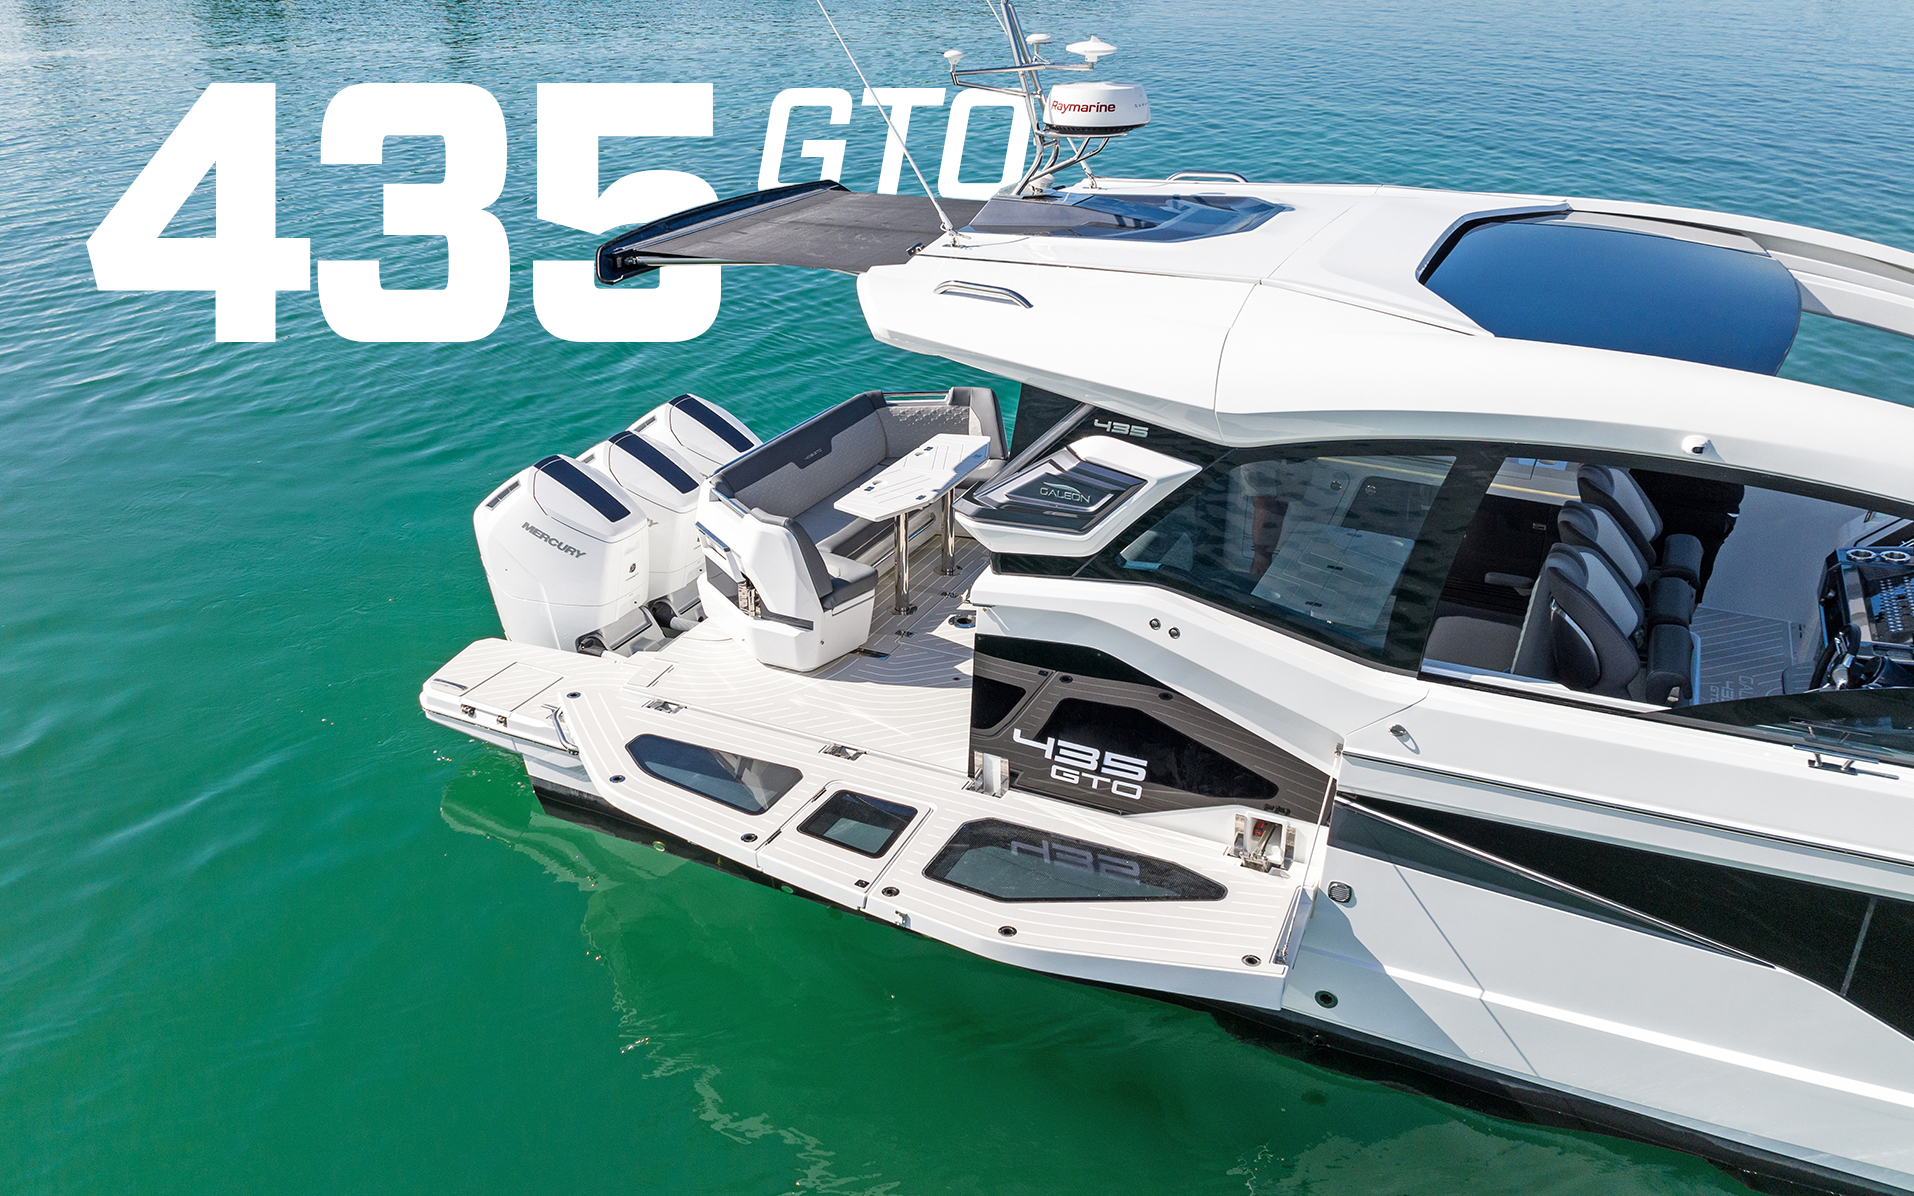 Galeon 435 GTO: Price & Specs Unveiled for Luxury Boating Enthusiasts